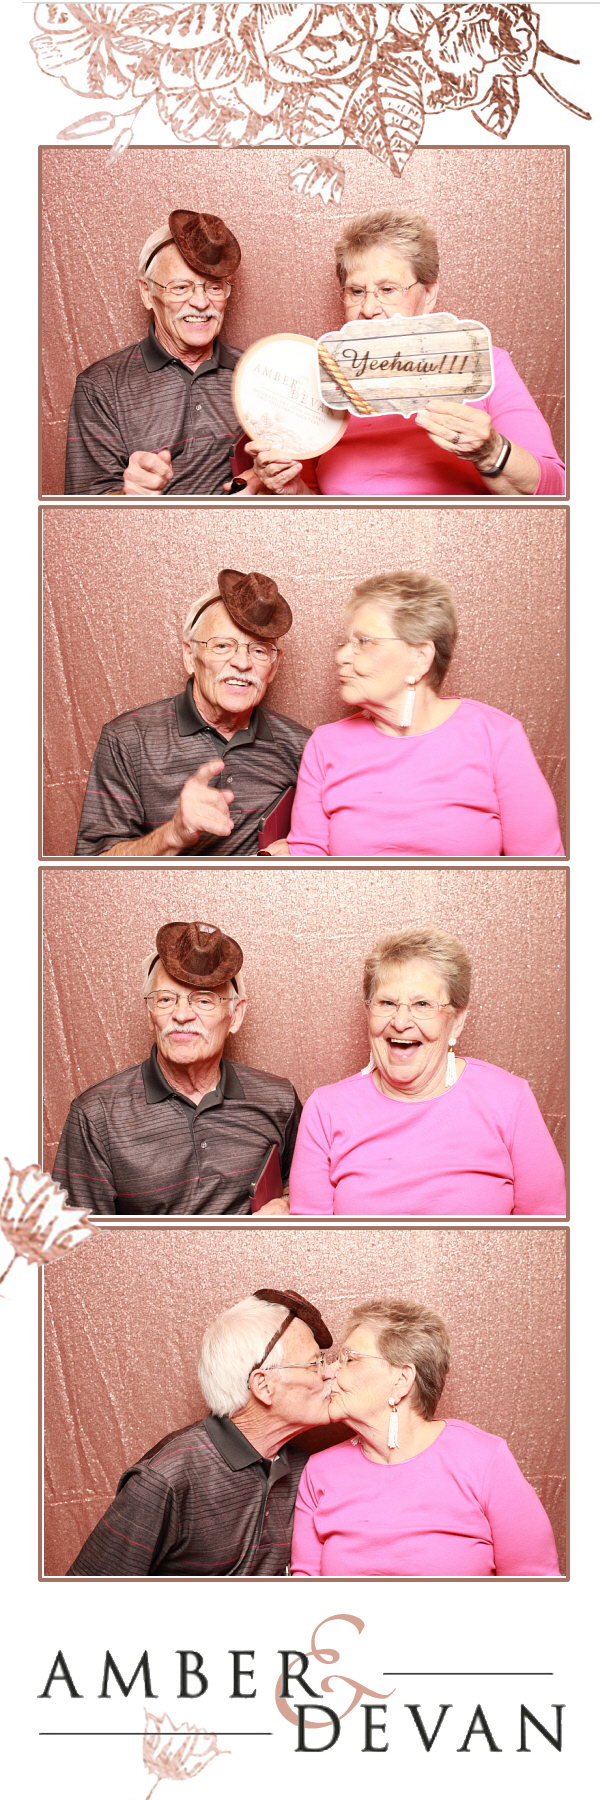 2x6 photo strip of couple posing with a shiny backdrop